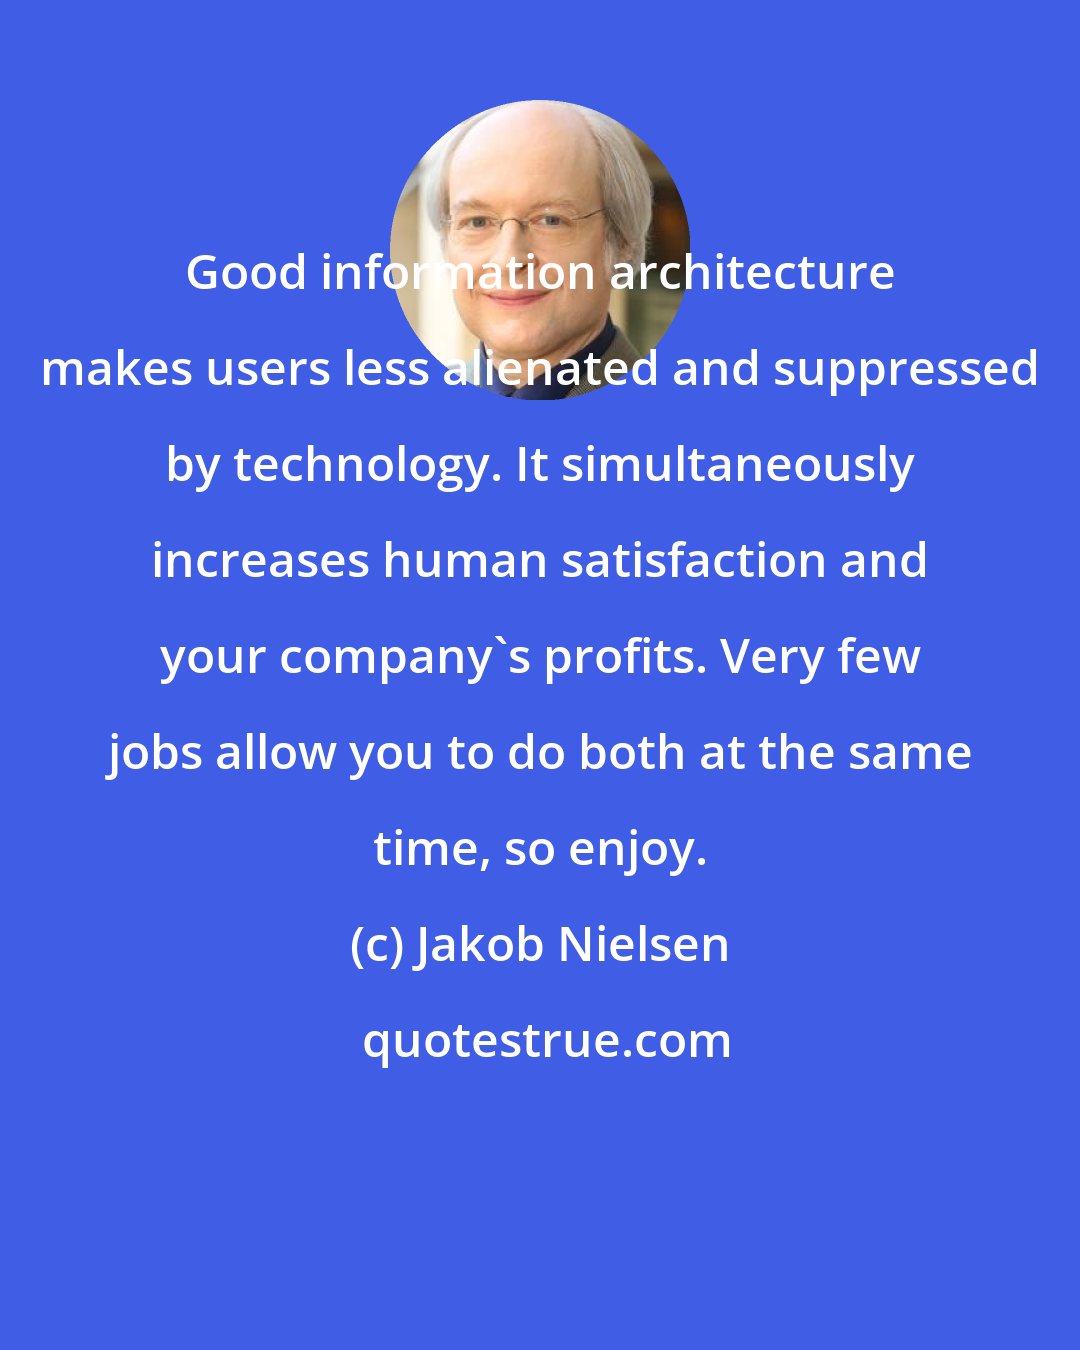 Jakob Nielsen: Good information architecture makes users less alienated and suppressed by technology. It simultaneously increases human satisfaction and your company's profits. Very few jobs allow you to do both at the same time, so enjoy.